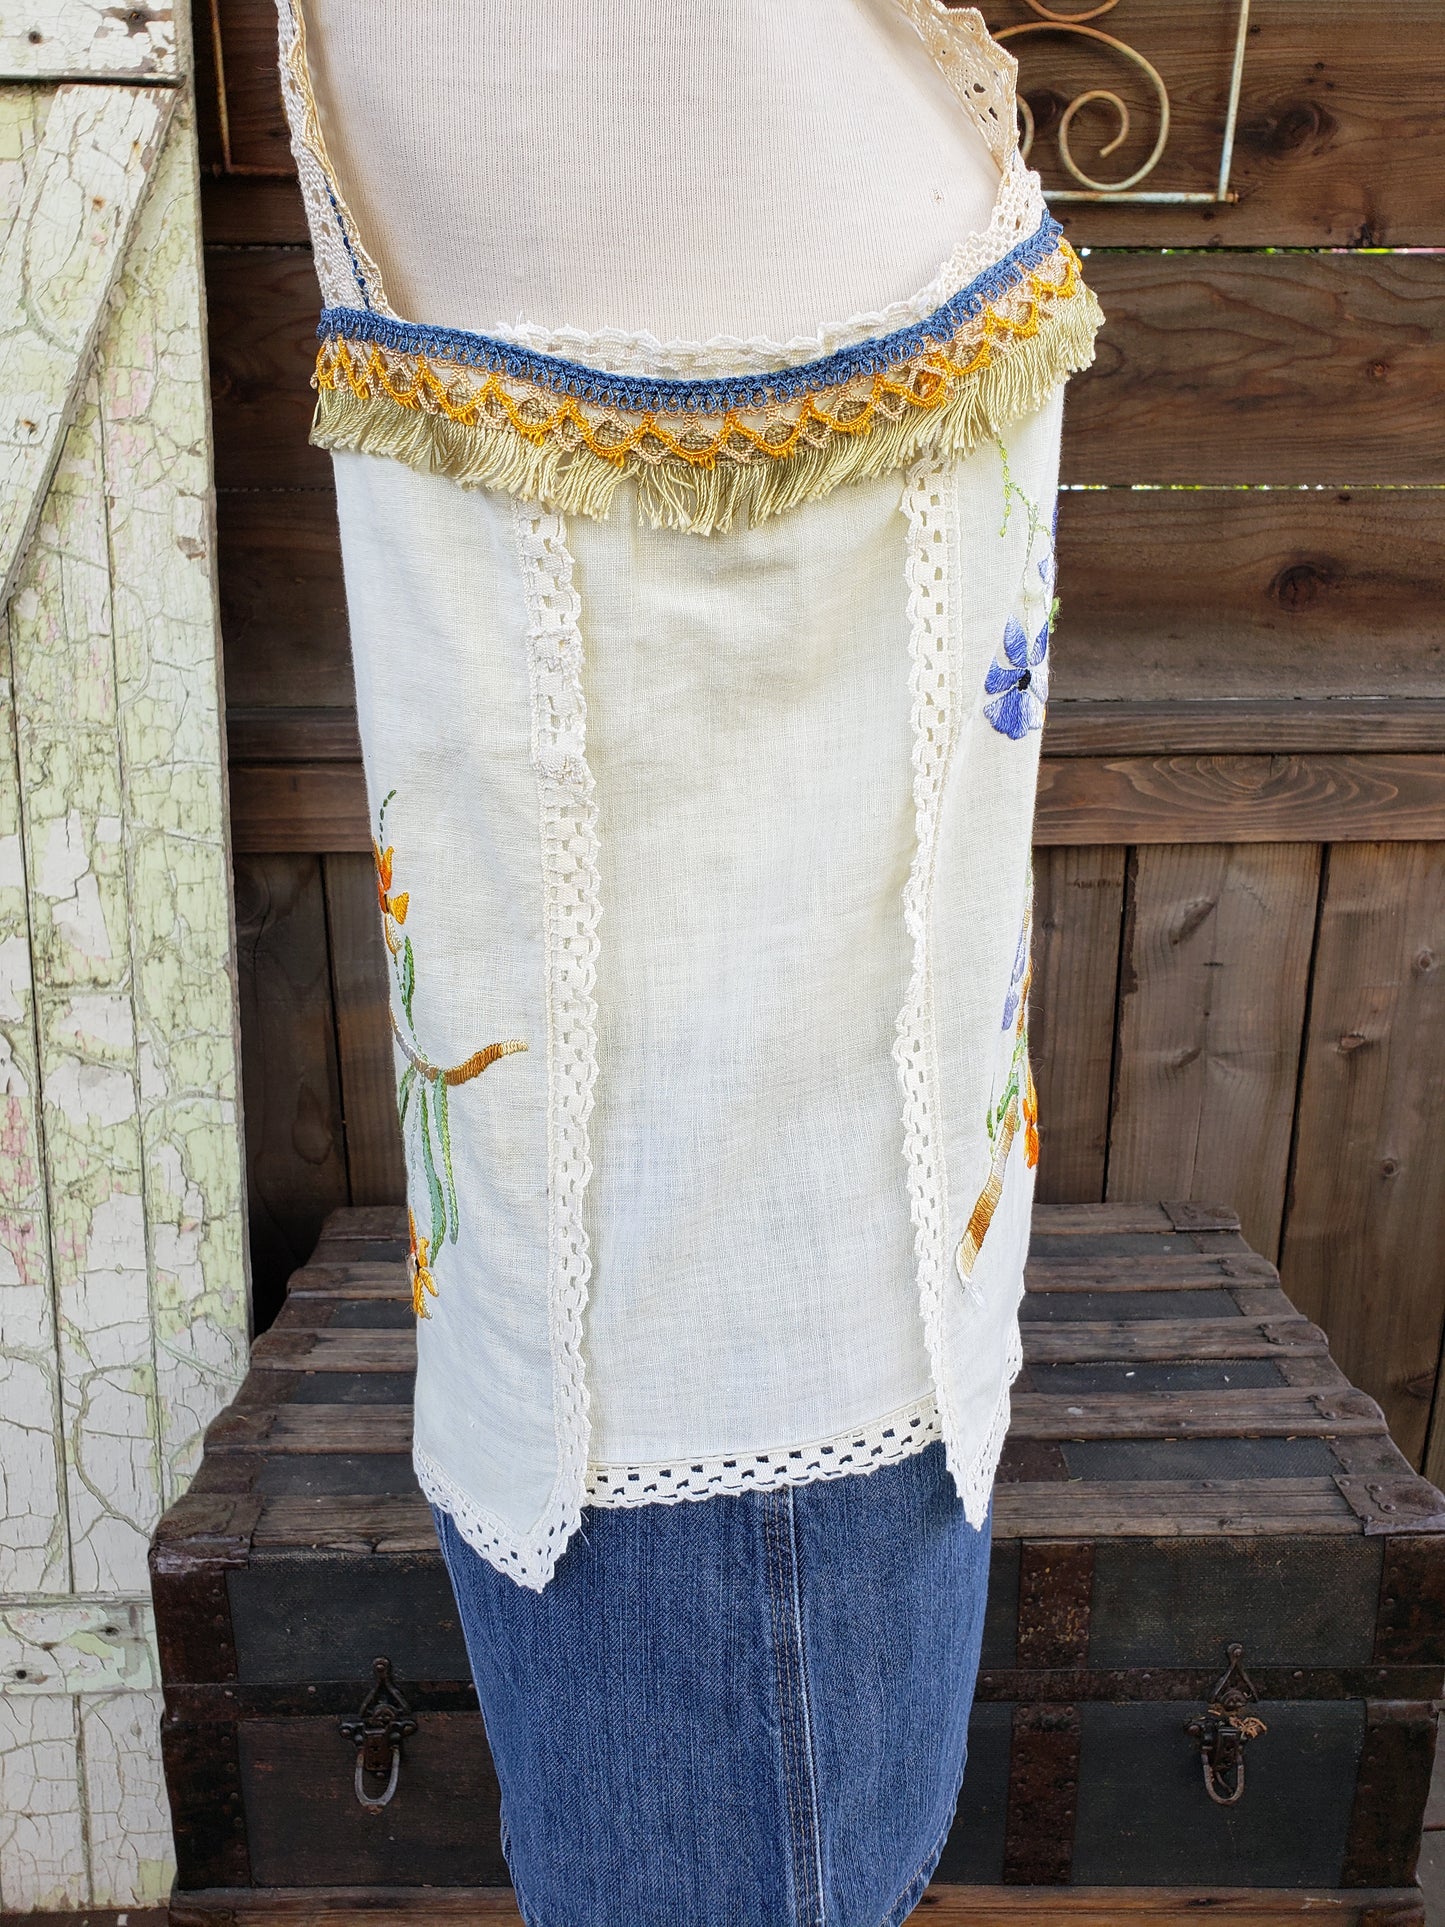 Embroidered vintage camisole with parrots